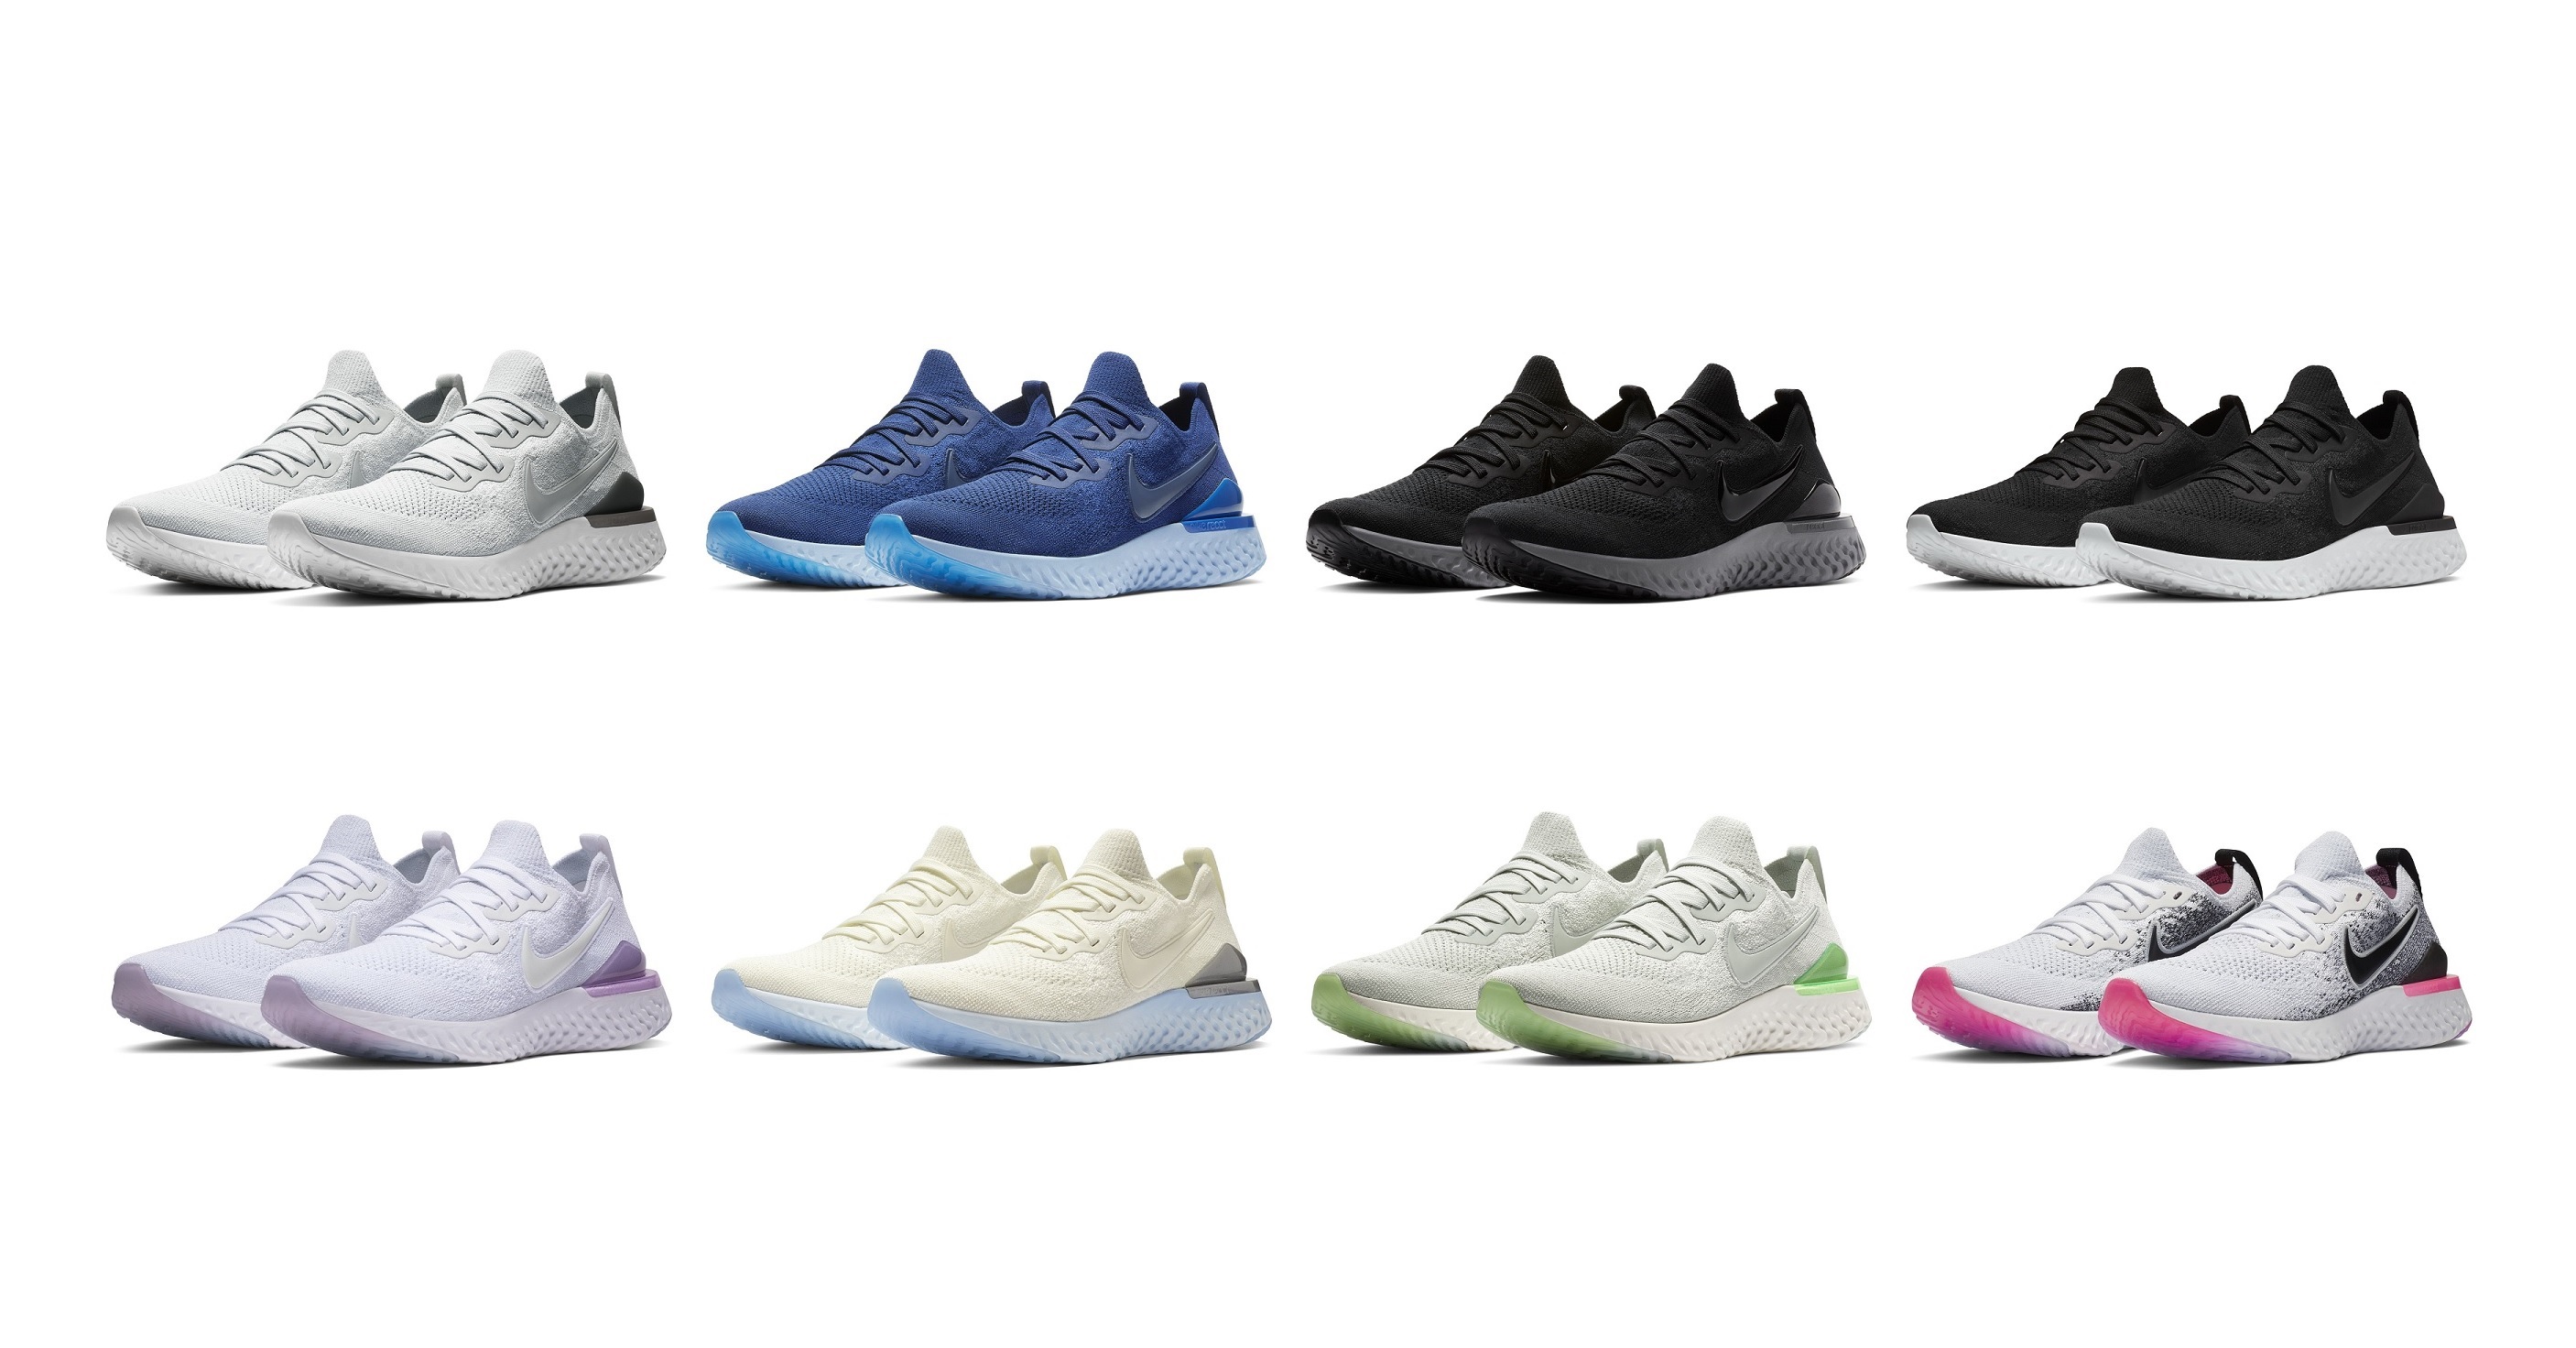 epic react flyknit 2 colorways